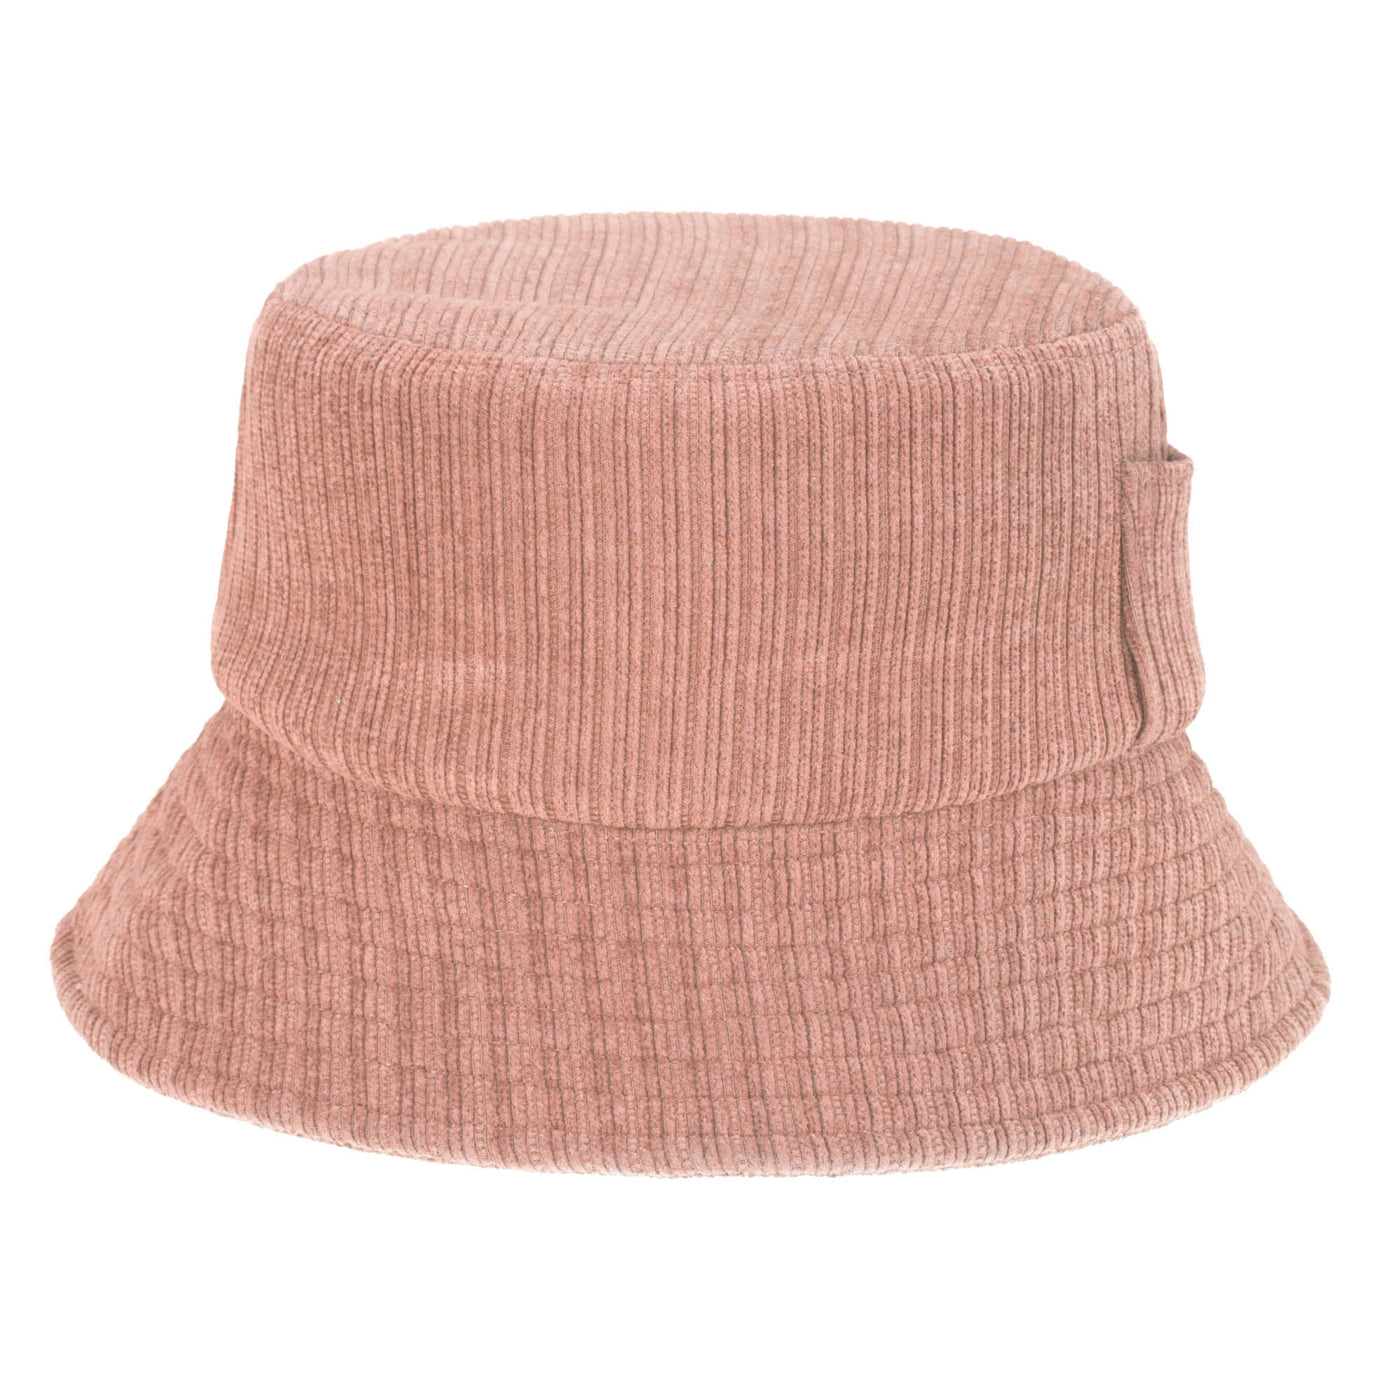 Cozy and Chic Women's Bucket Hat – San Diego Hat Company